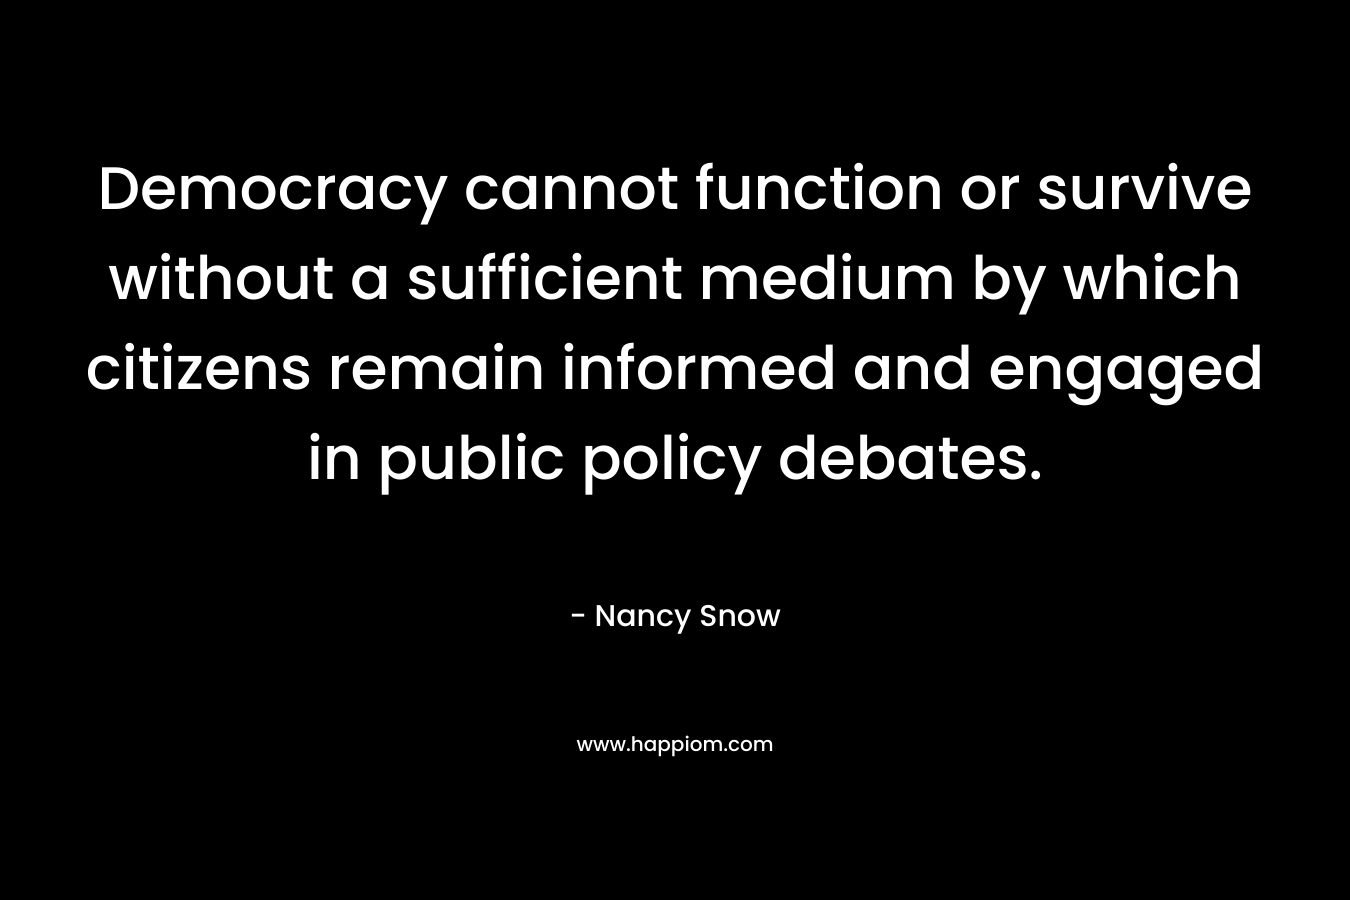 Democracy cannot function or survive without a sufficient medium by which citizens remain informed and engaged in public policy debates.